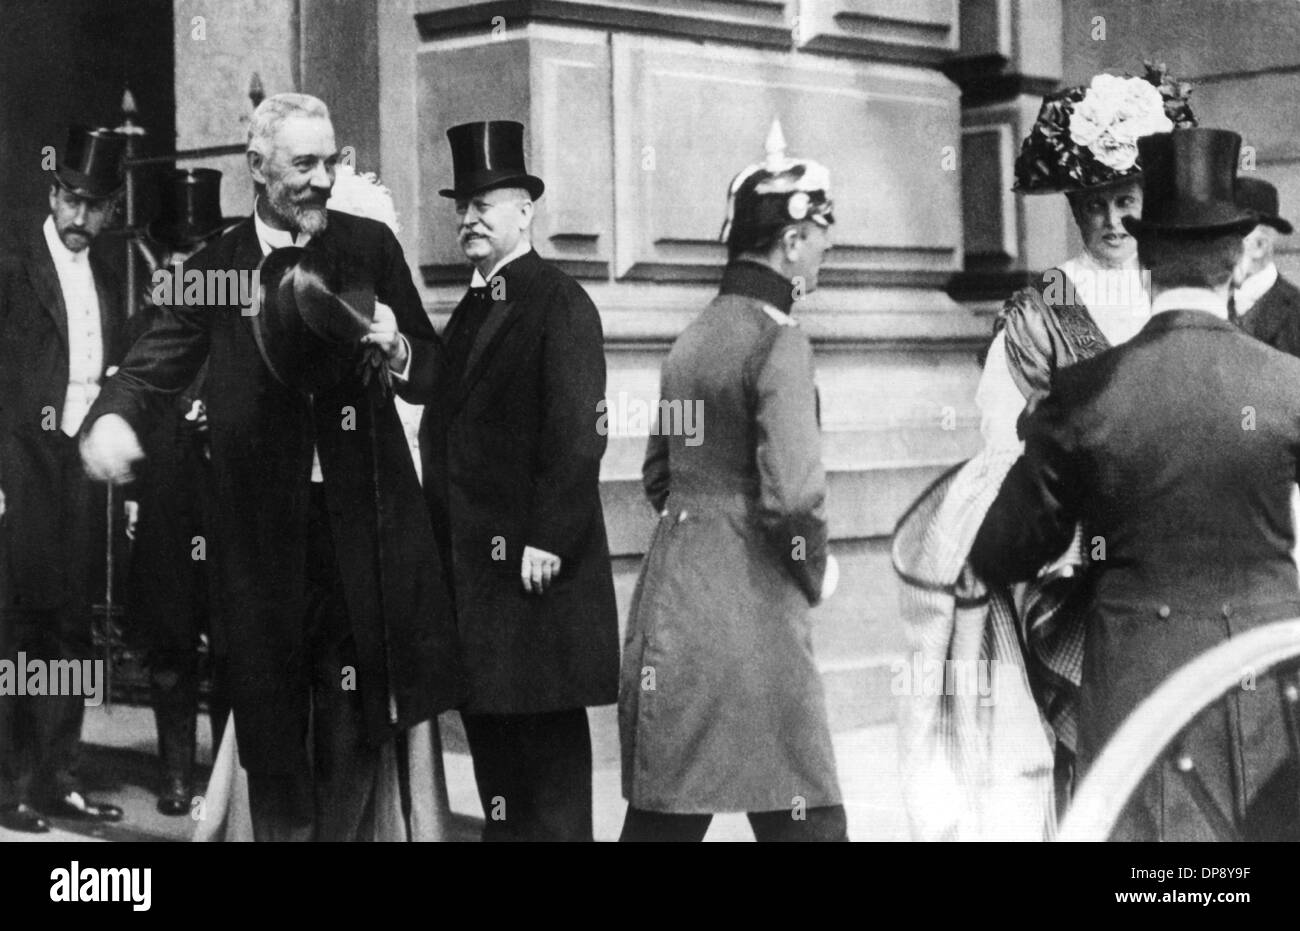 Politician Theobald von Bethmann-Hollweg (l) is dismissed at Lehrter train station by his predecessor Bernhard Prince von Bülow (2nd of left) after his appointment as Imperial chancellor and Prussian minister president. He had already aimed for a peace resolution in November 1914. After Ludendorff and Hindenburg had taken over the Supreme Army Command in 1916, he lost rapidly lost political power. He was born on the 29th of November in 1856 in Hohenfinow near Eberswalde and died there on the 2nd of January in 1921. Stock Photo